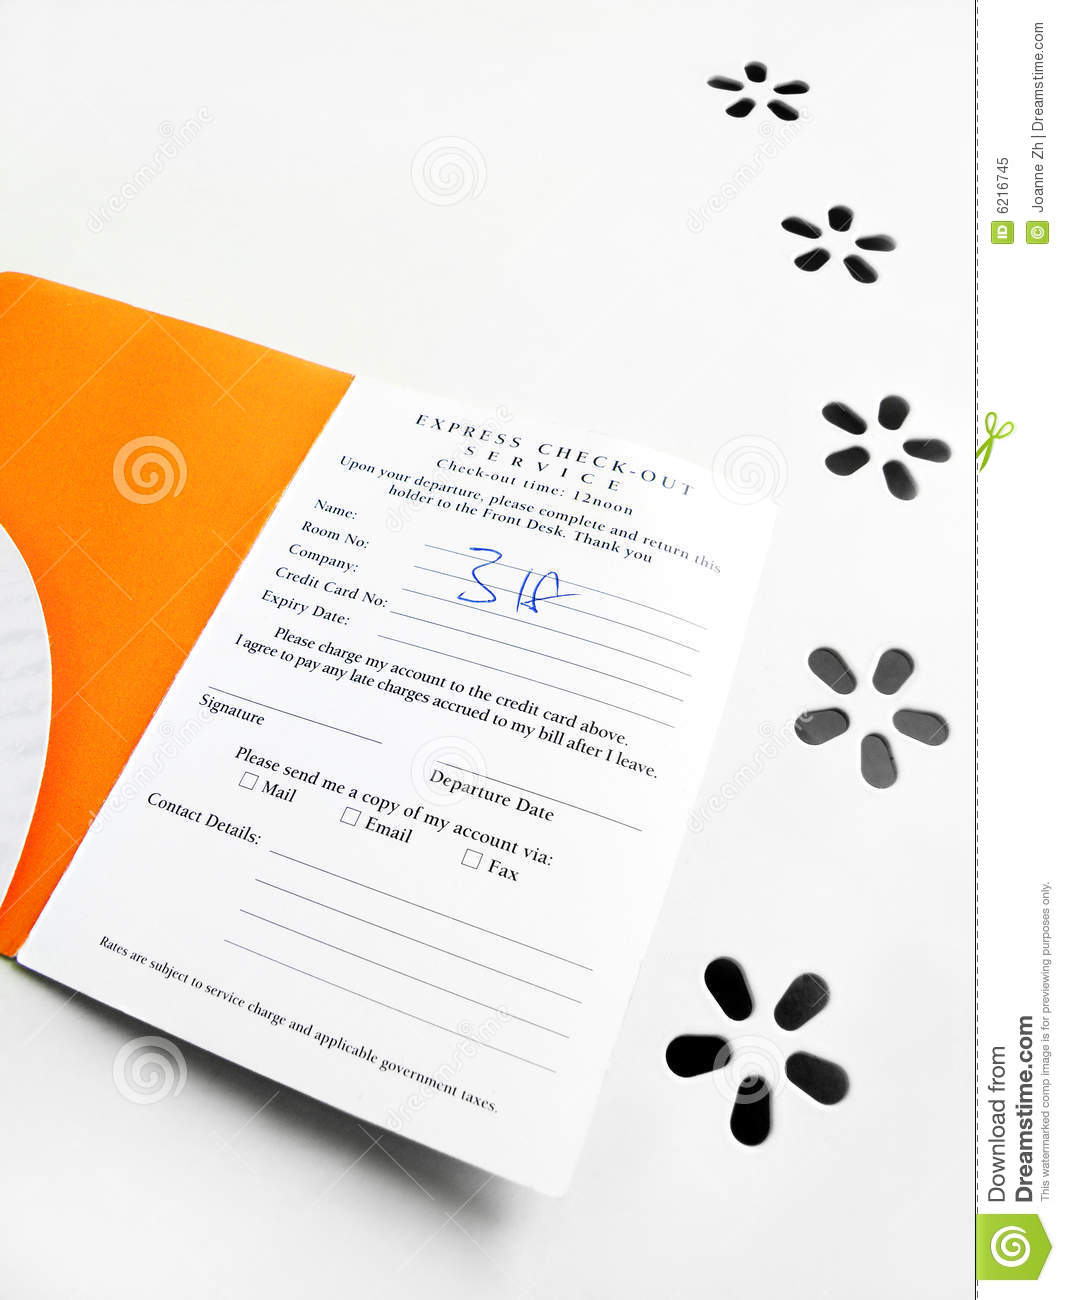 Hotel Check In Card Royalty Free Stock Photo   Image  6216745